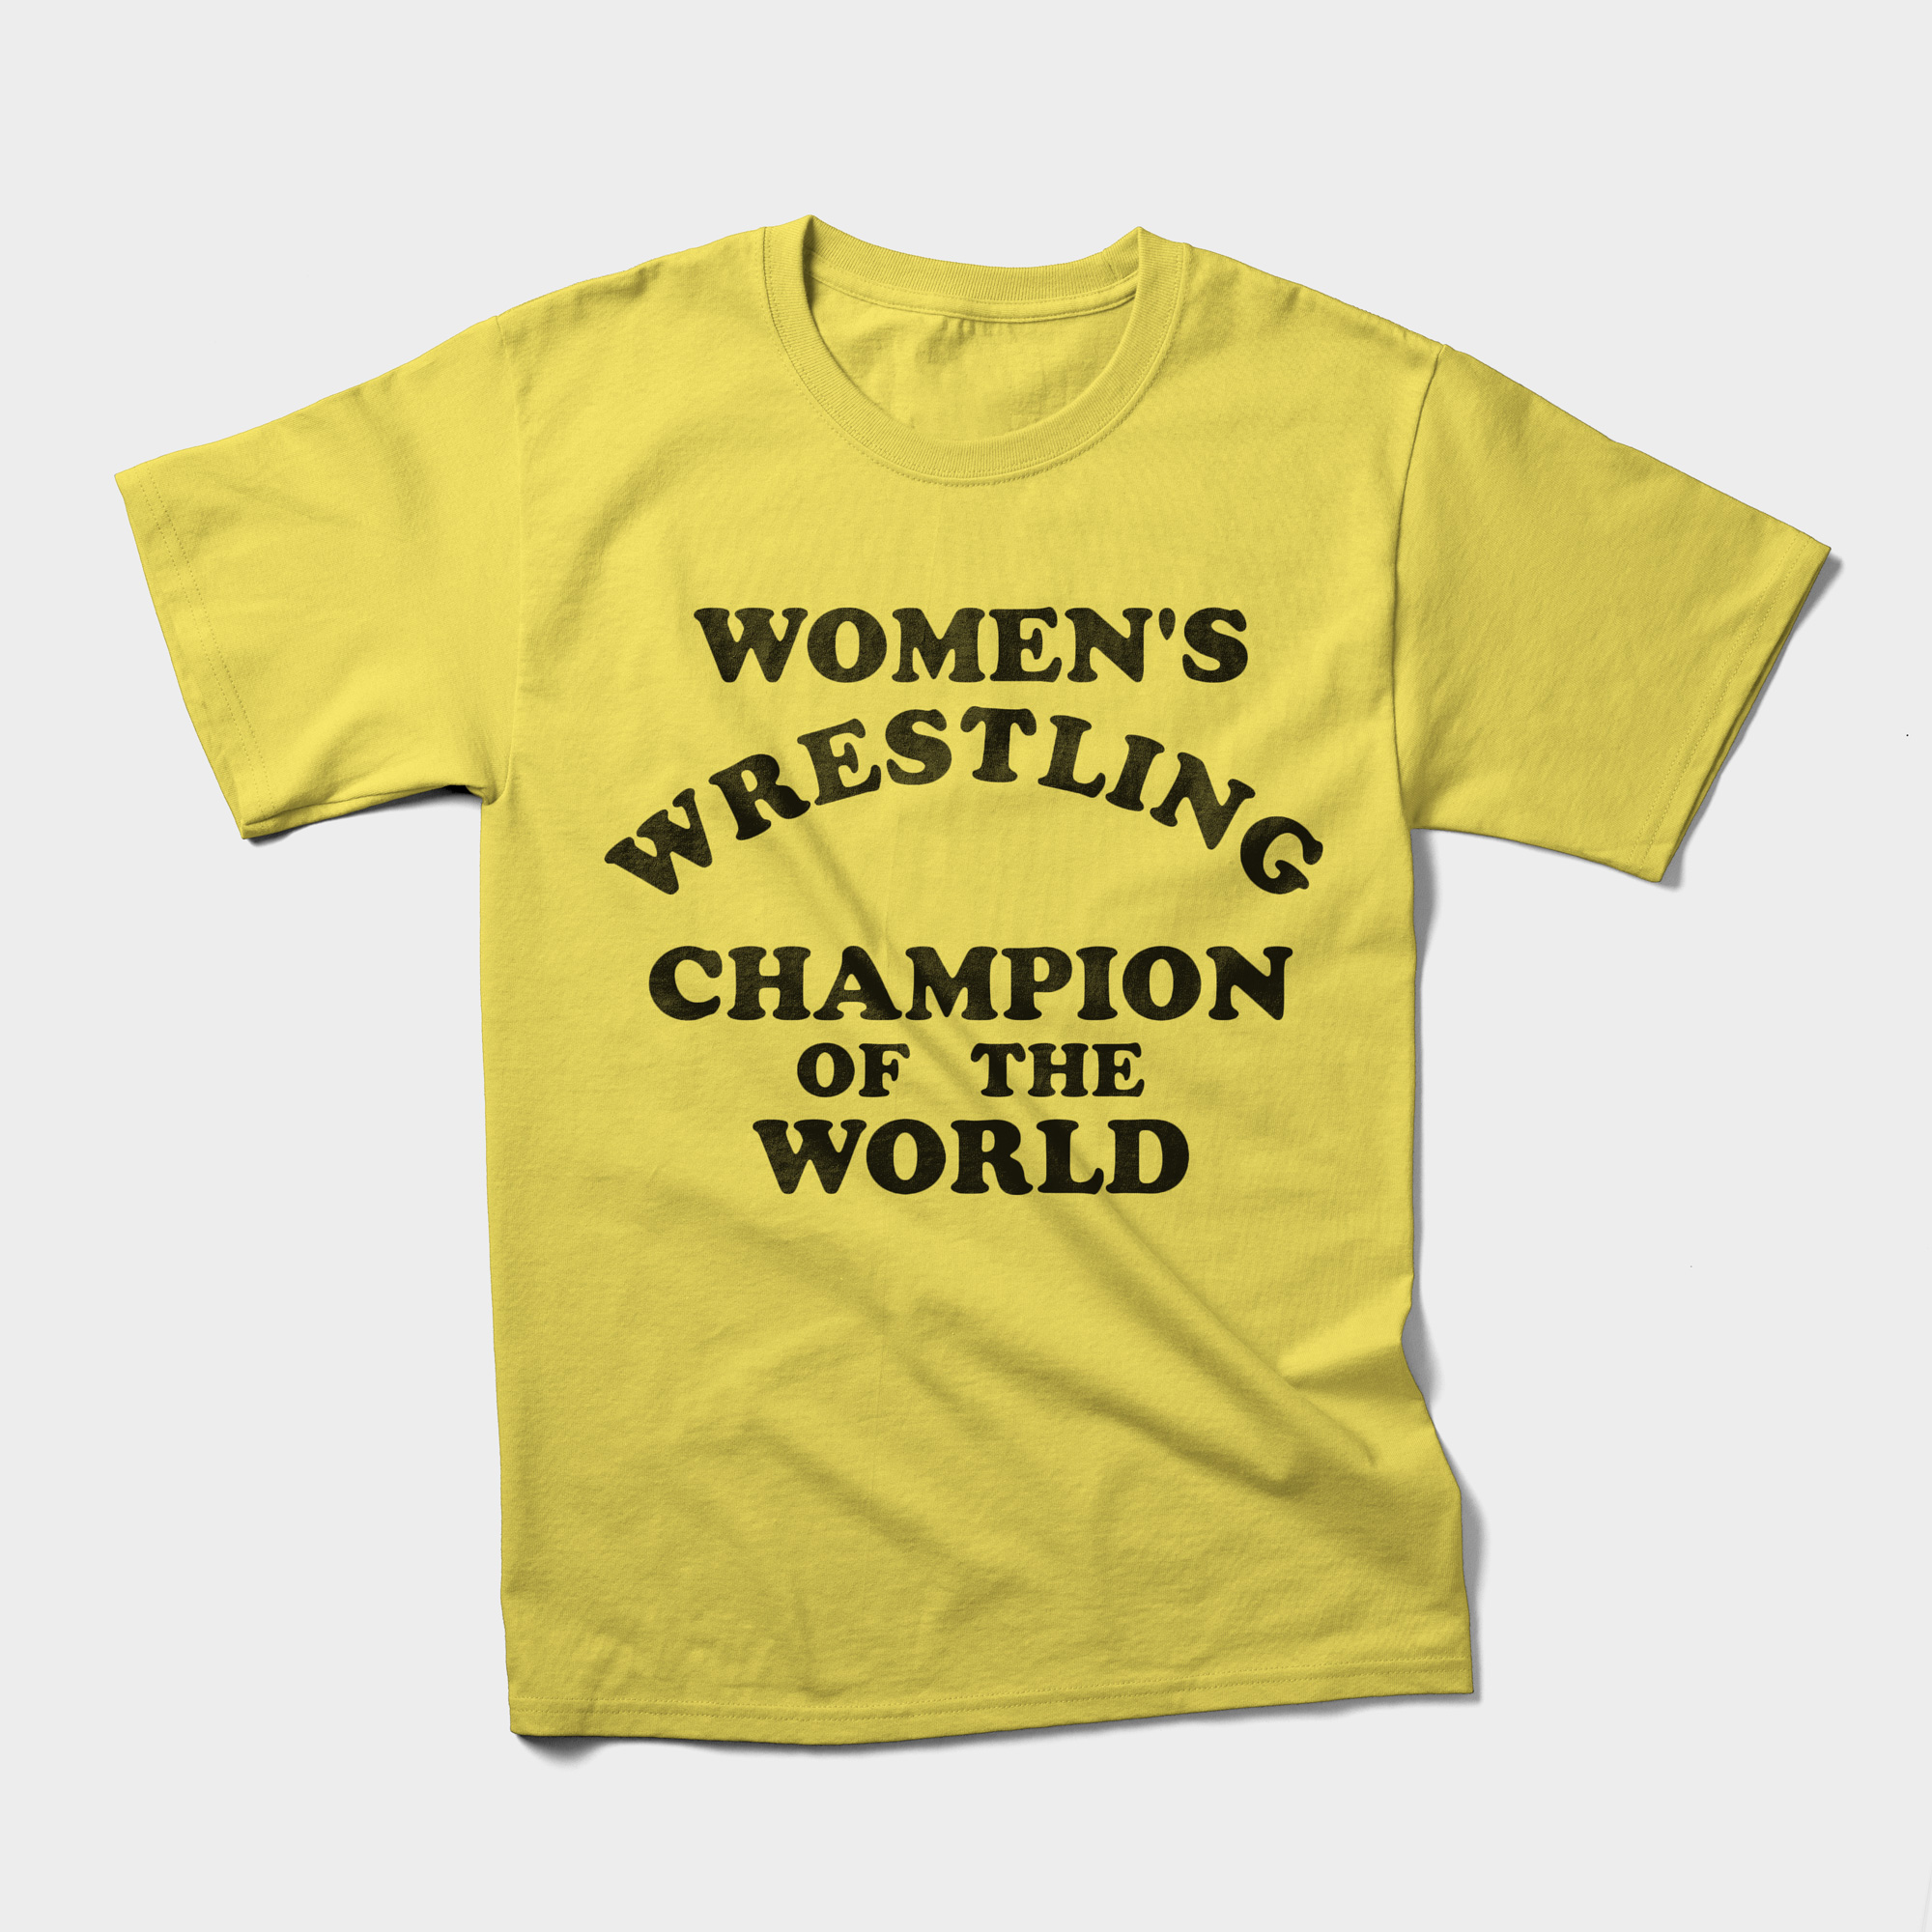 Andy Kaufman's yellow t-shirt that says "Women's Wrestling Champion of the World." 